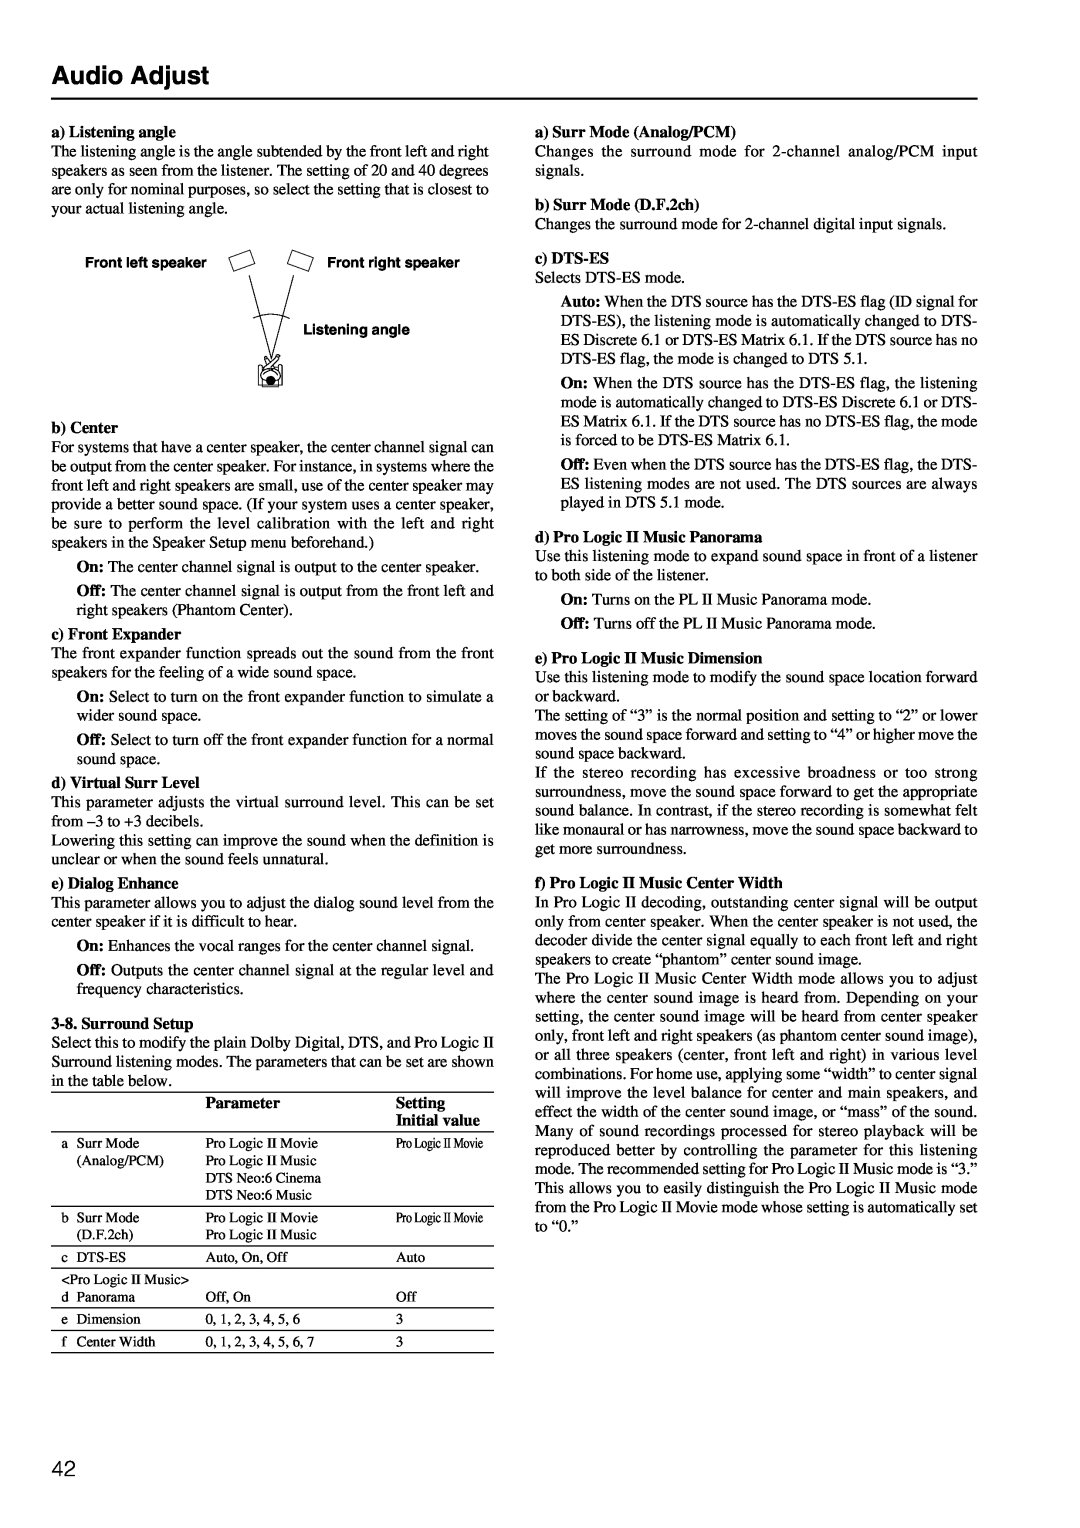 Onkyo TX-DS797 instruction manual Audio Adjust, a Listening angle 